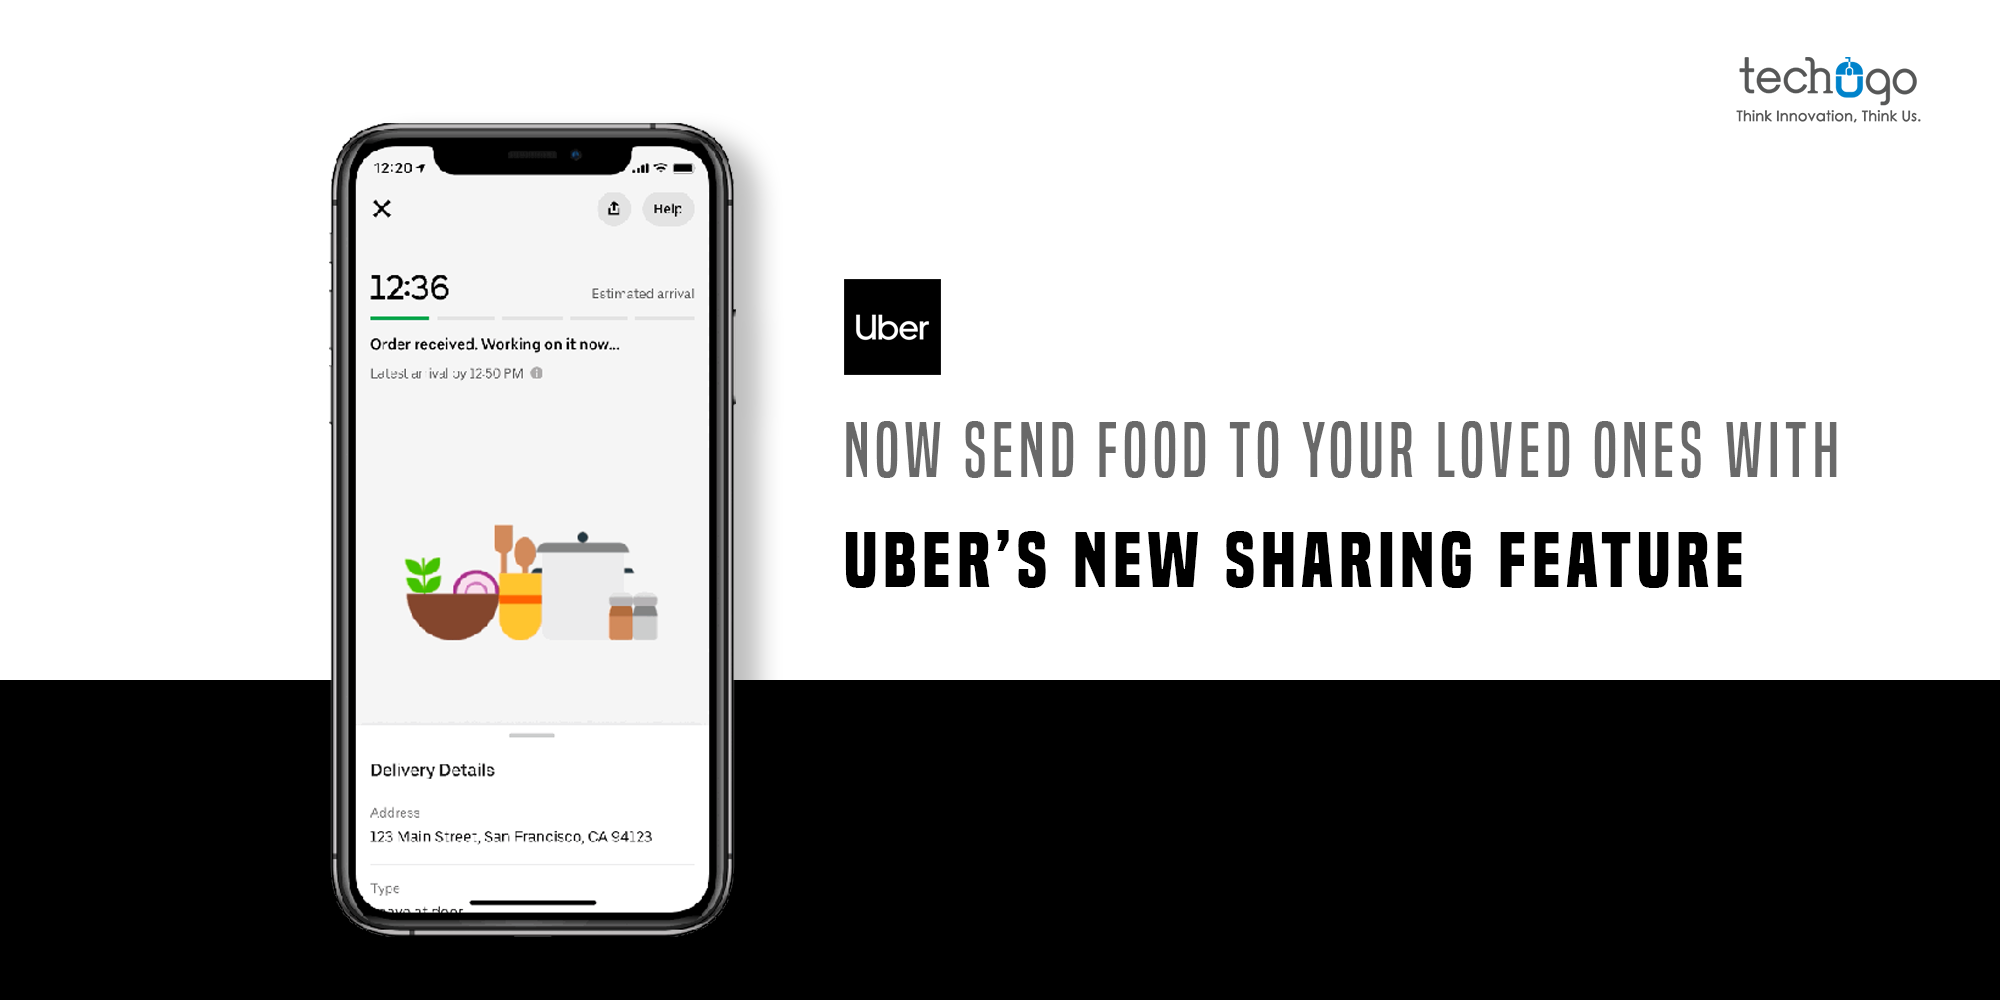 Now Send Food To Your Loved Ones  With Uber’s New Sharing Feature